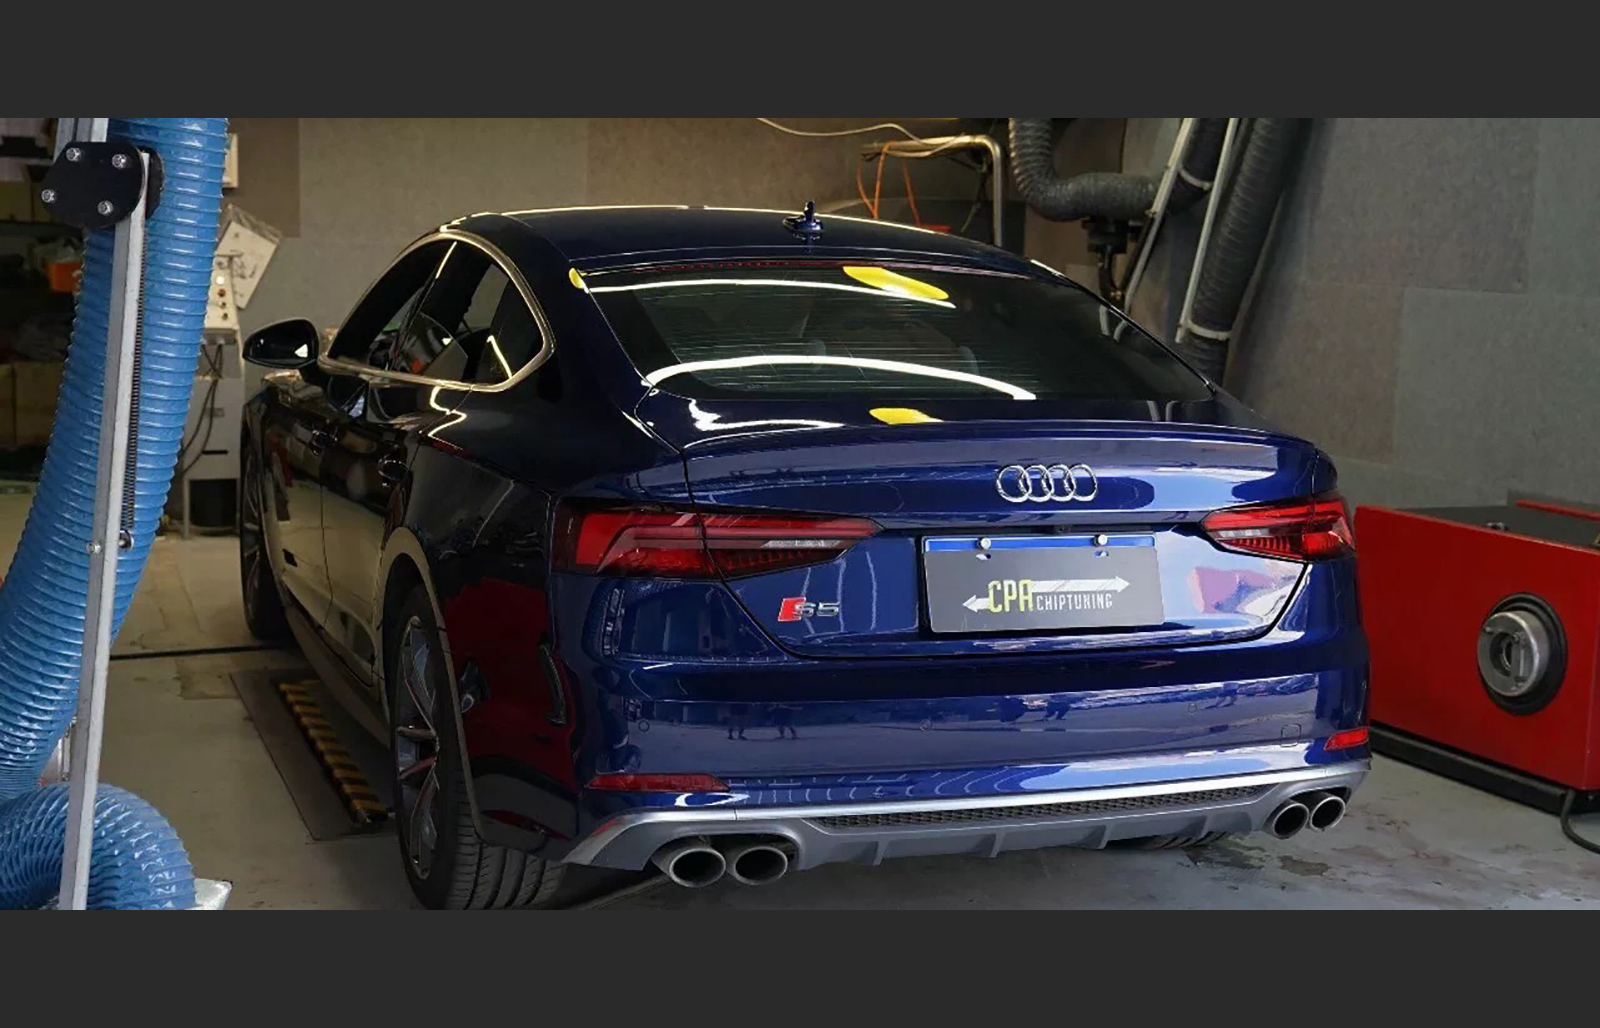 Chiptuning Audi: S5 with CPA Power